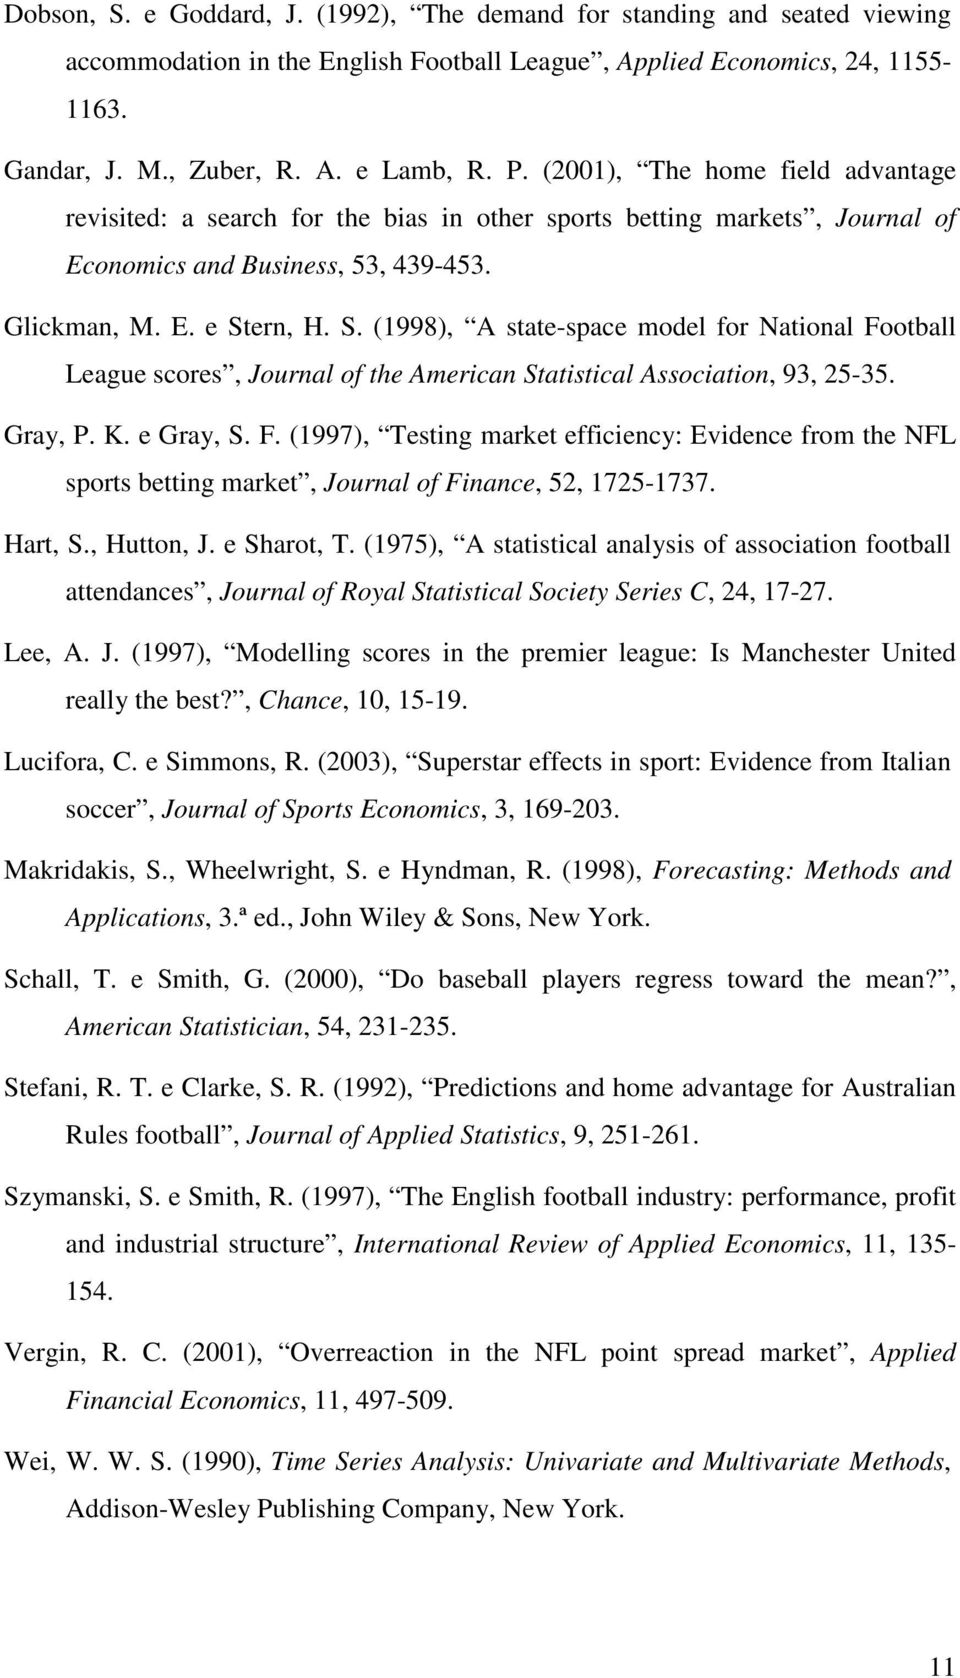 rn, H. S. (1998), A sae-space model for Naional Fooball League scores, Journal of he American Saisical Associaion, 93, 25-35. Gray, P. K. e Gray, S. F. (1997), Tesing marke efficiency: Evidence from he NFL spors being marke, Journal of Finance, 52, 1725-1737.